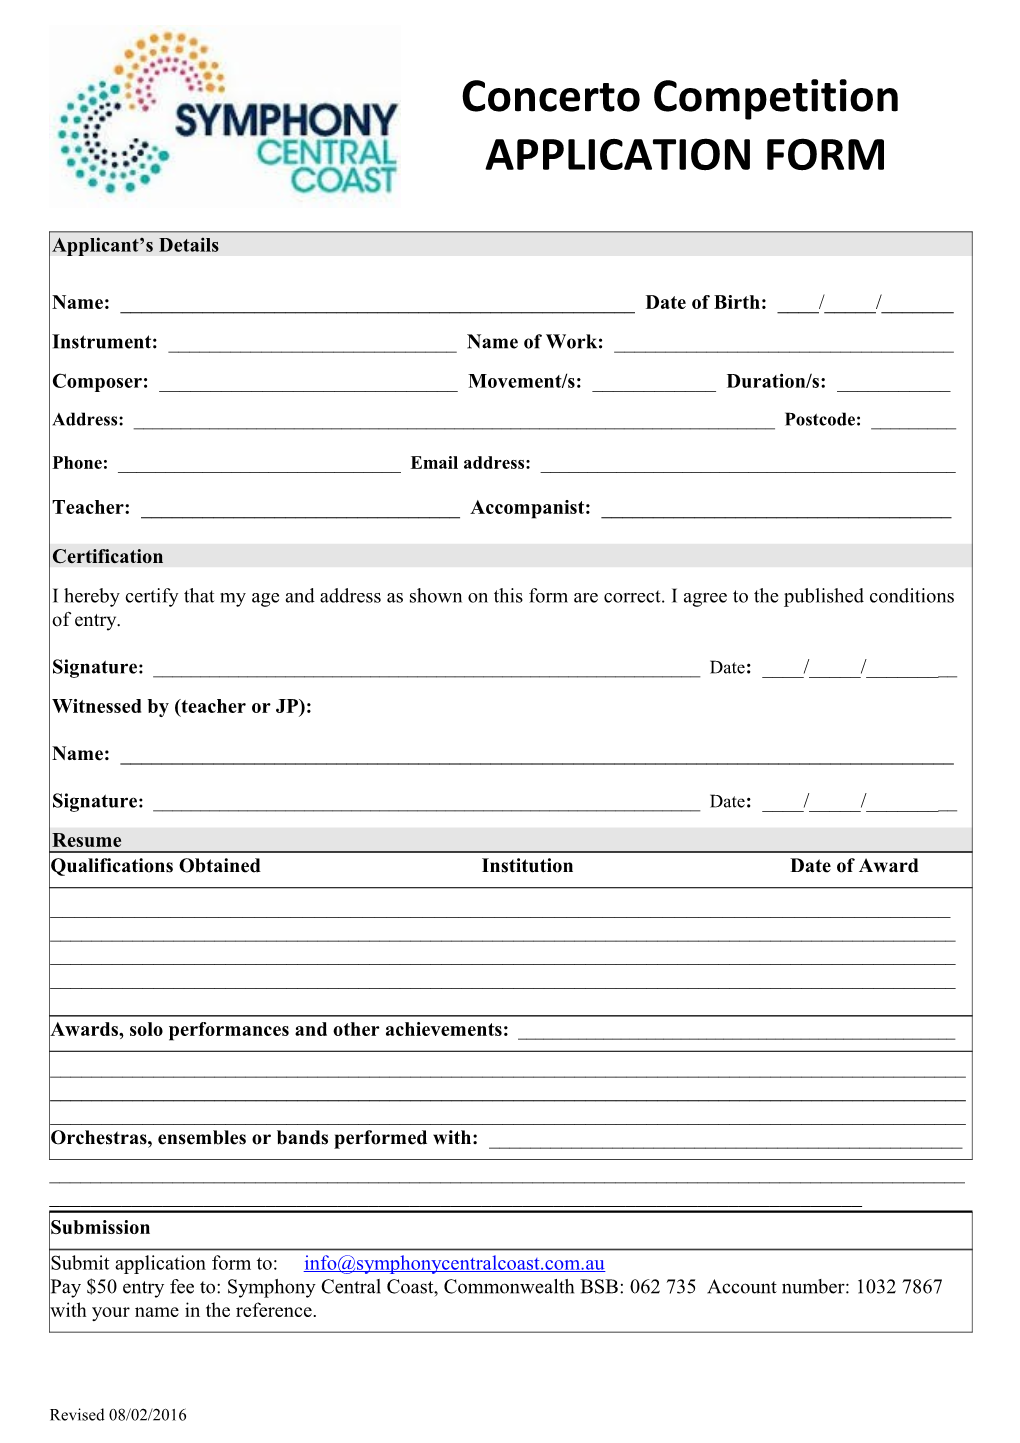 Applicant Document Low Res for Web